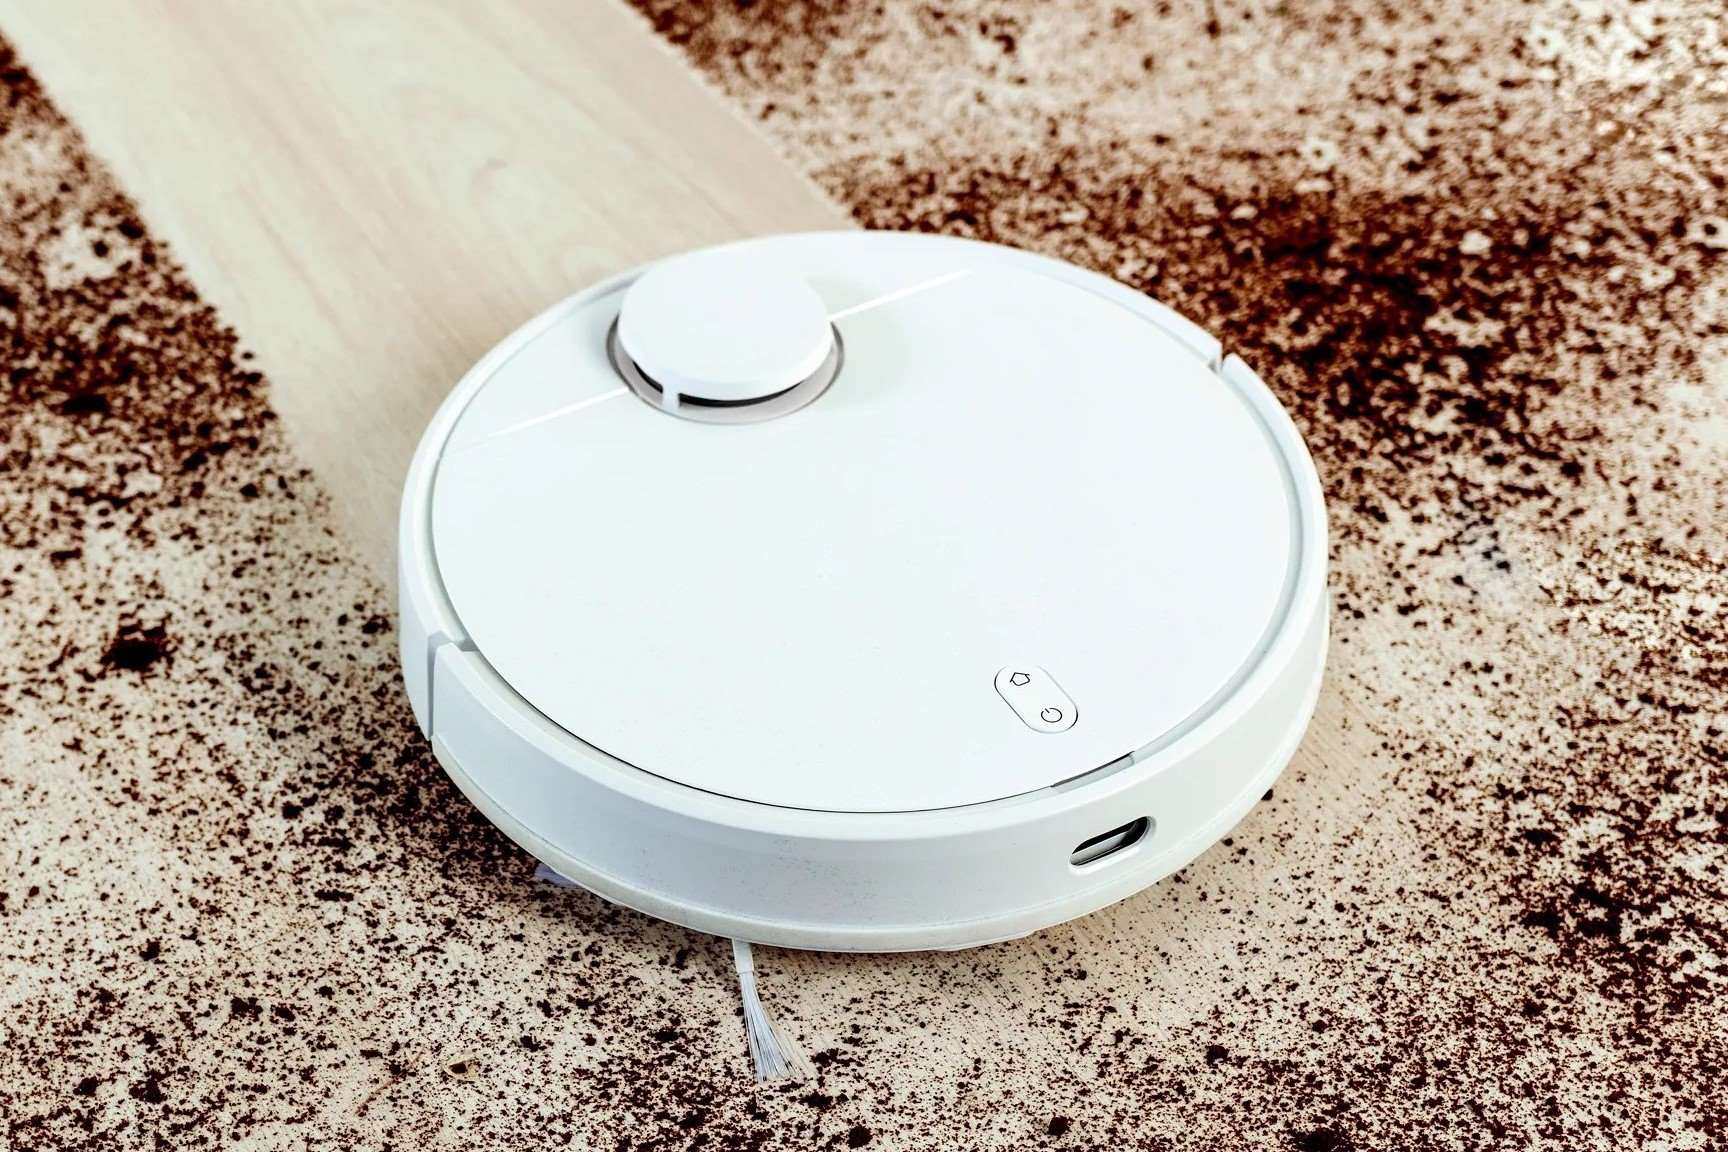 scheduling-cleanup-on-xiaomi-robot-vacuum-a-quick-tutorial